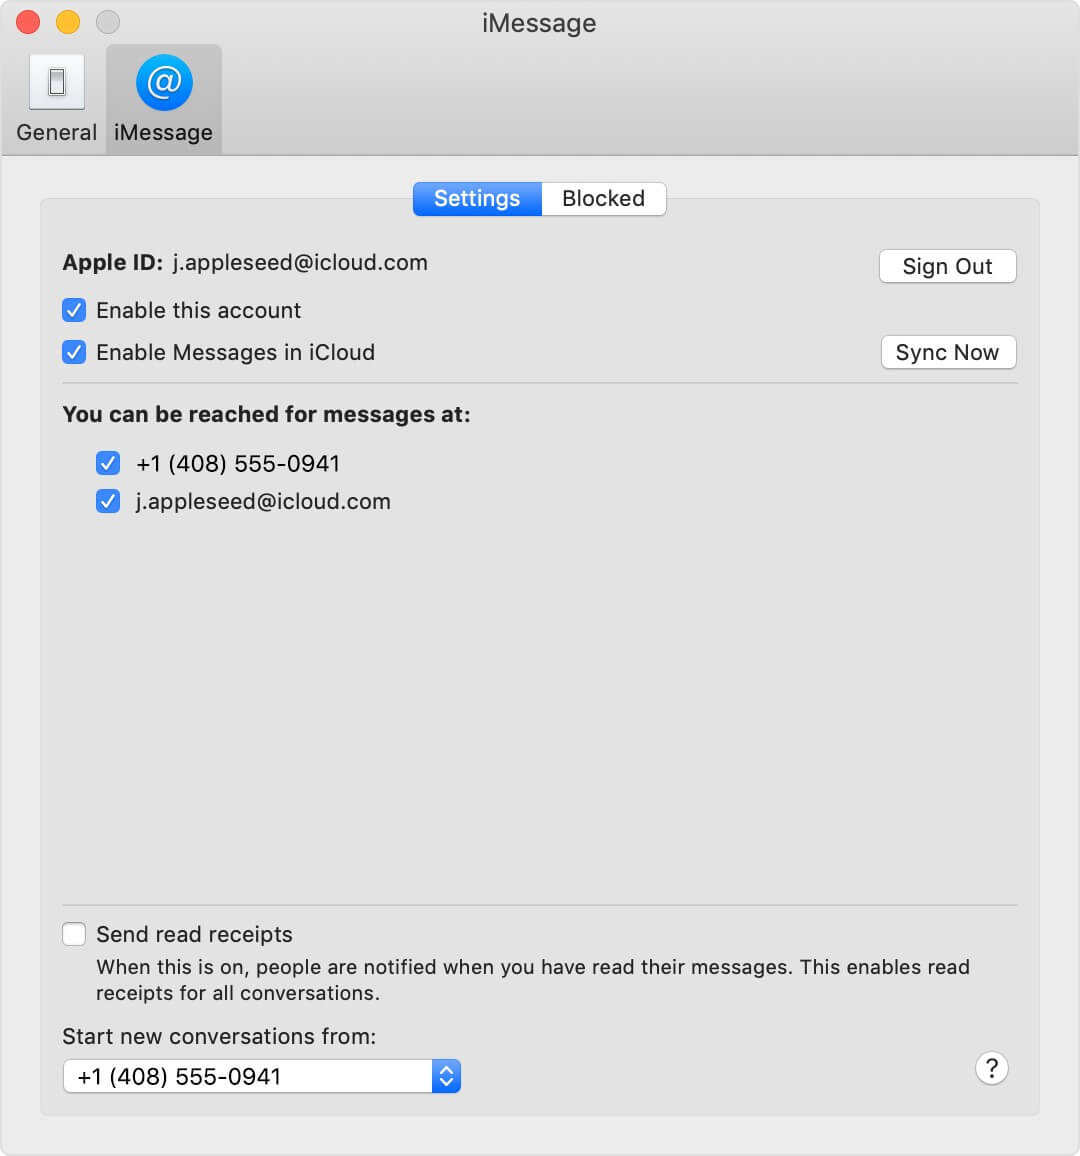 how to save text messages from iphone to icloud